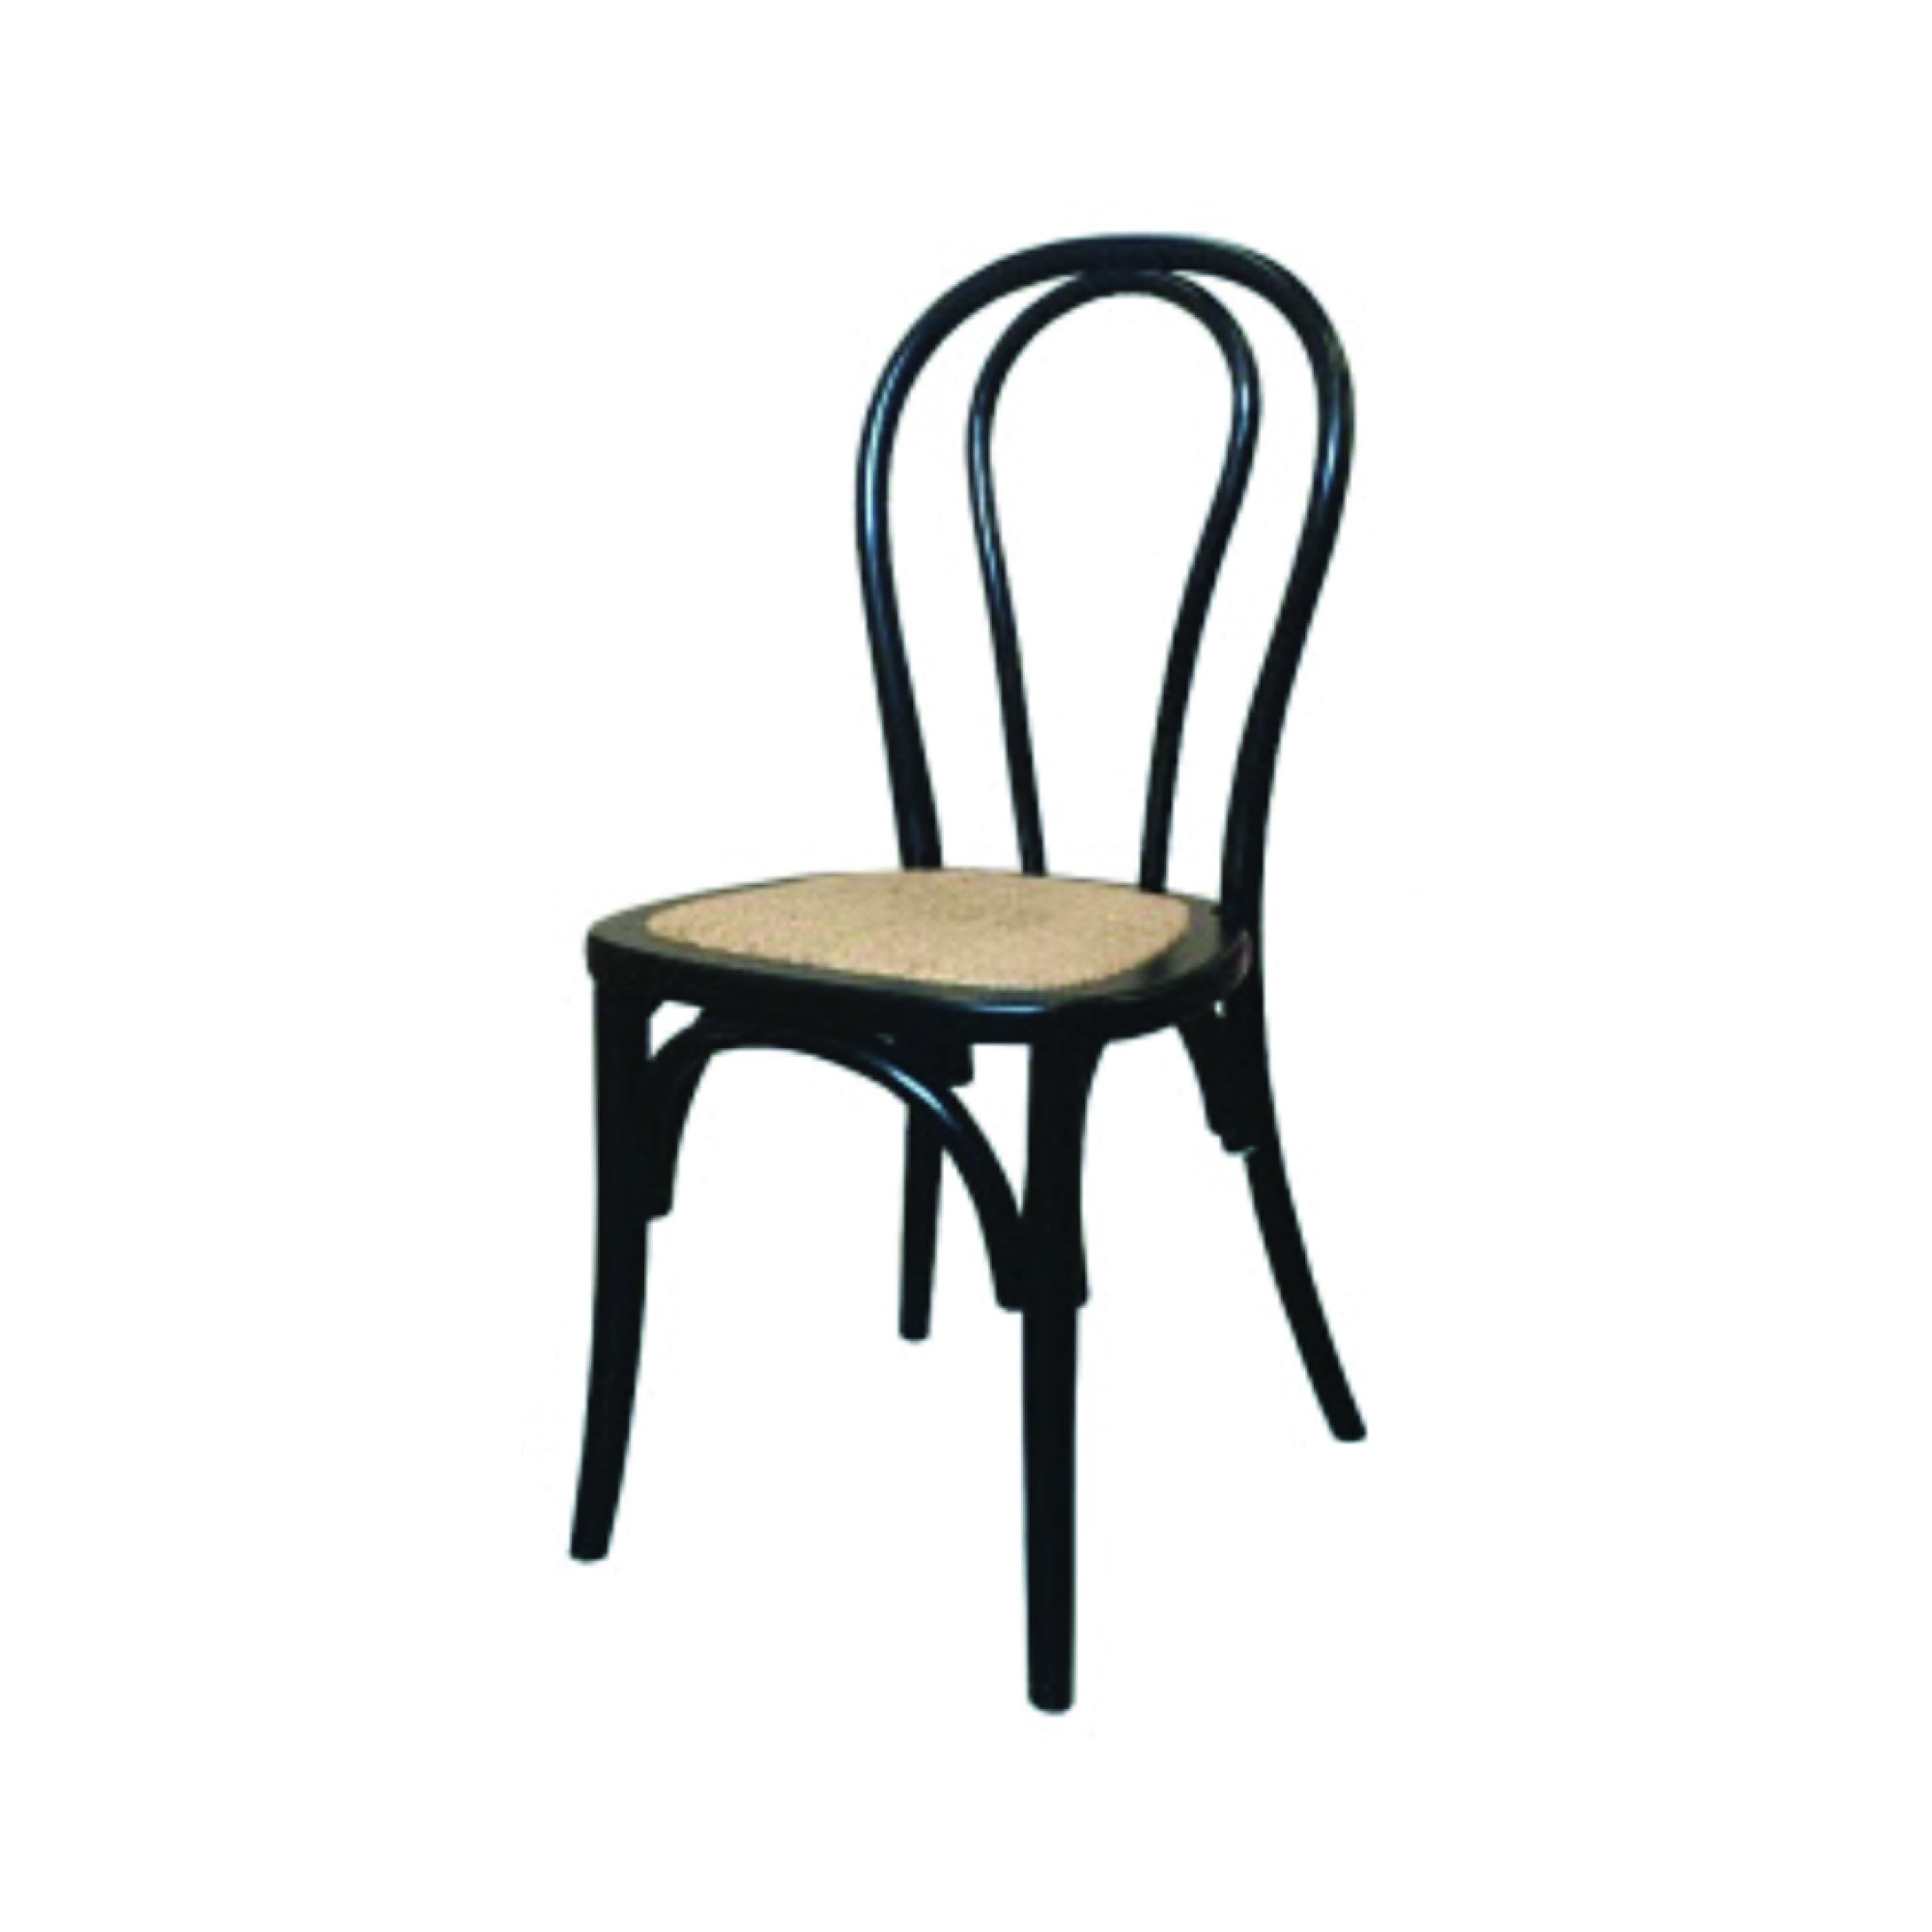 Stackable Bentwood Chair Black